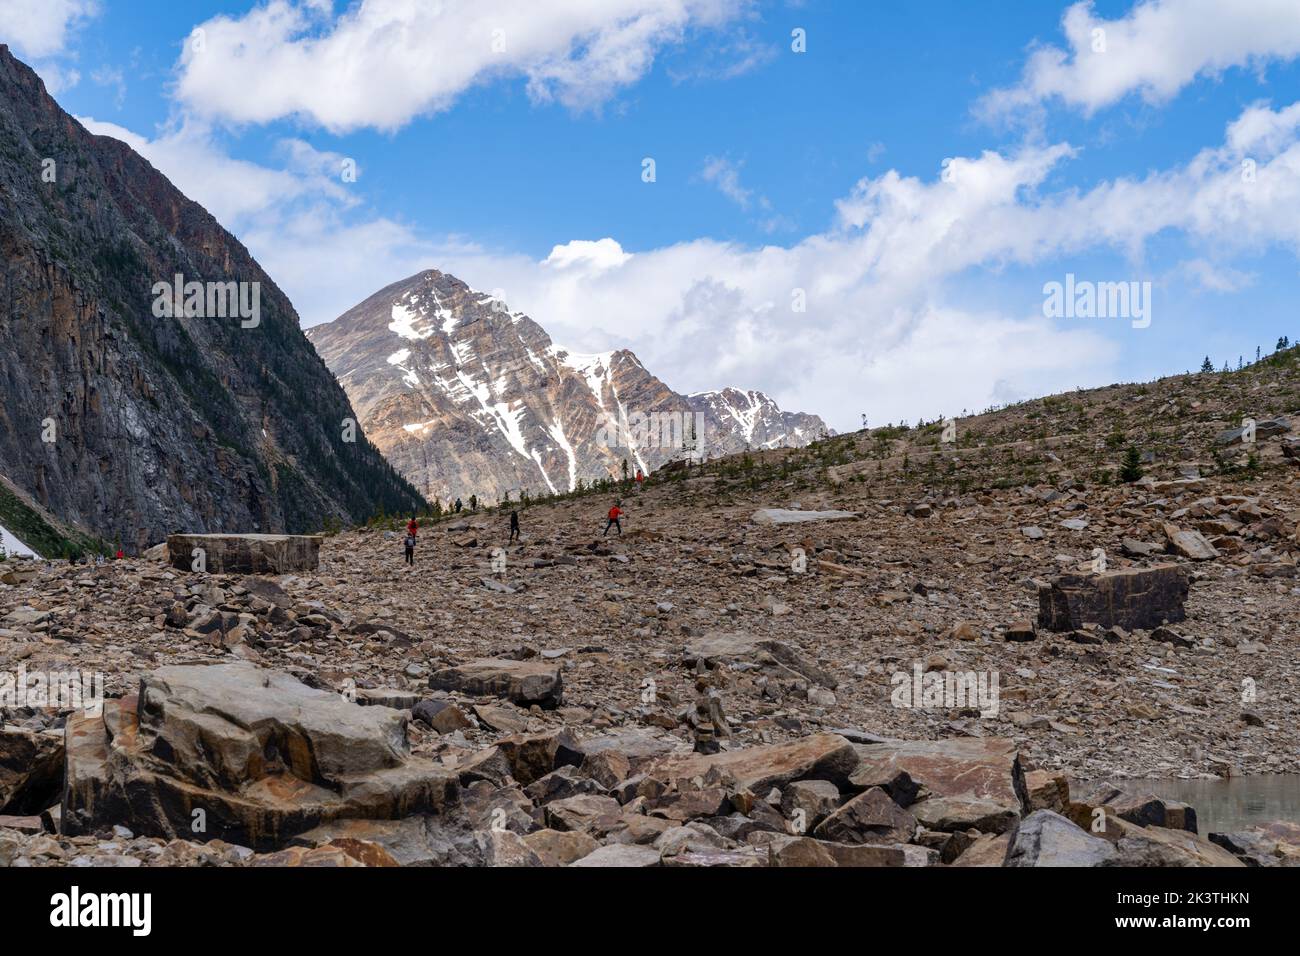 Jasper, Alberta, Canada - July 13, 2022: Hikers make their way along the Path of the Glacier trail at Mt. Edith Cavell Stock Photo